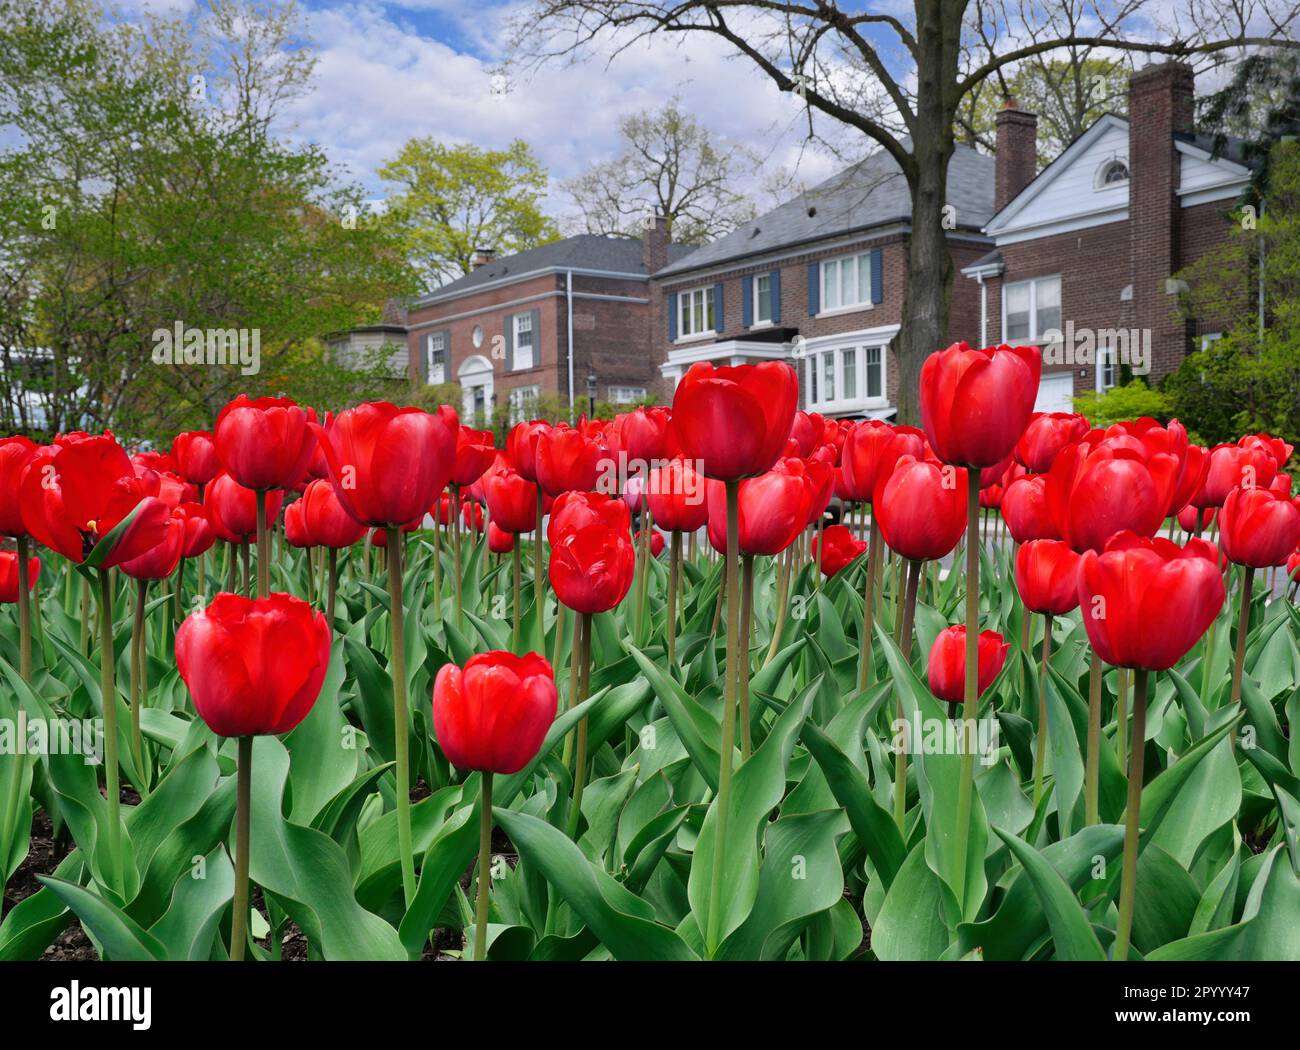 Mass planting of deep red tulips on a residential street Stock Photo